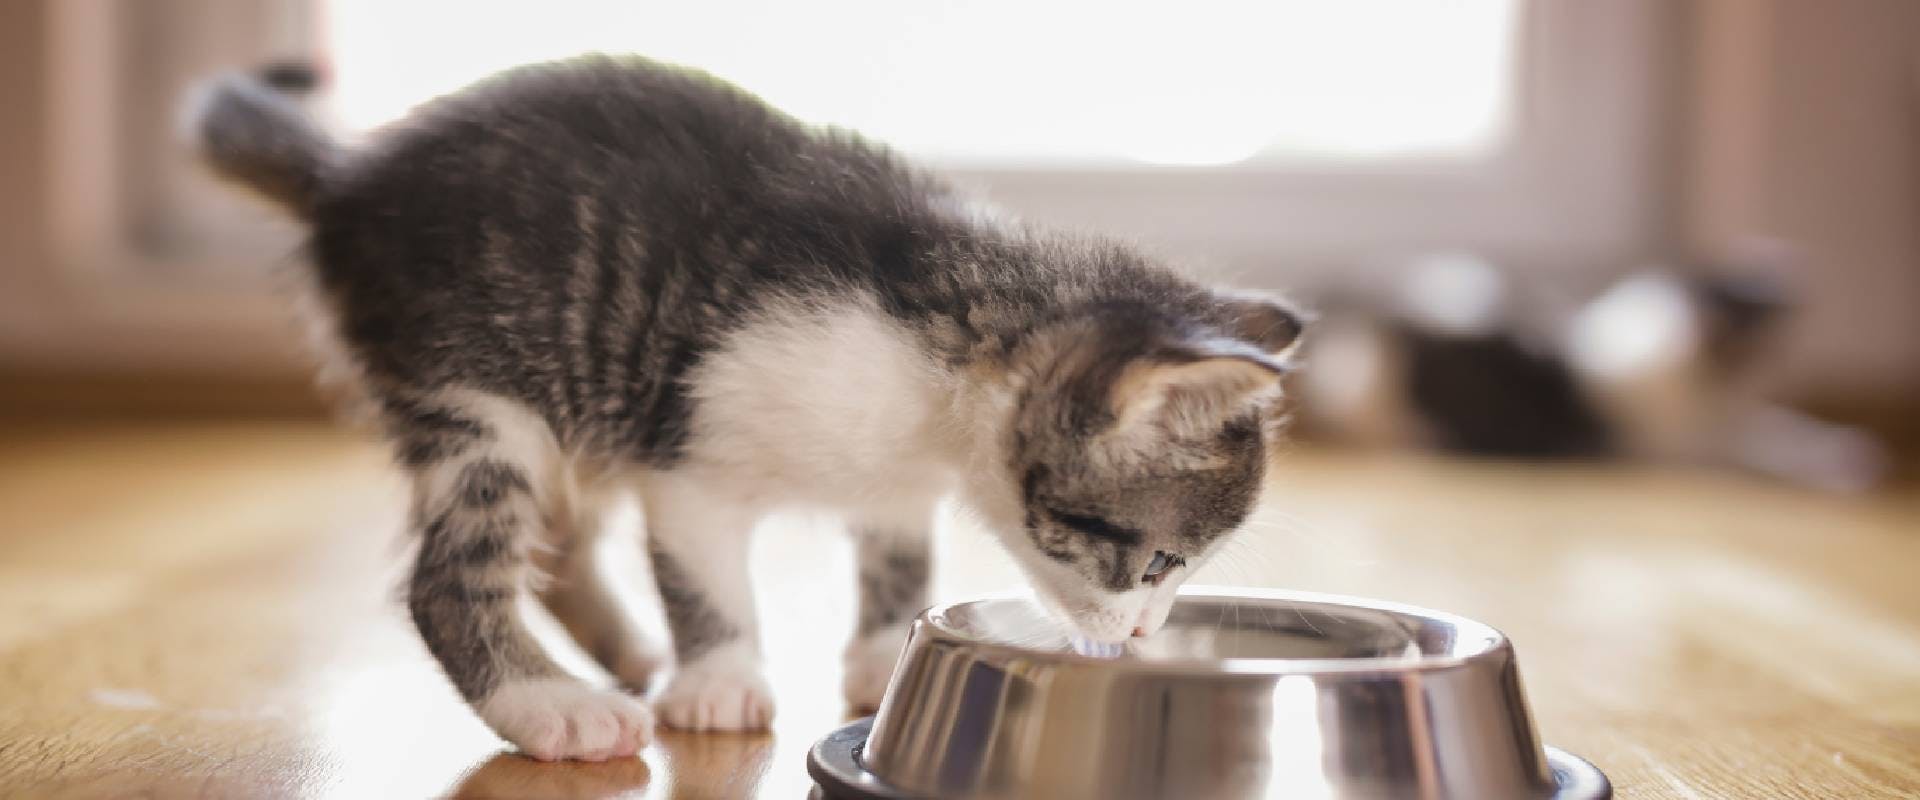 Kitten drinking from a metal bowl